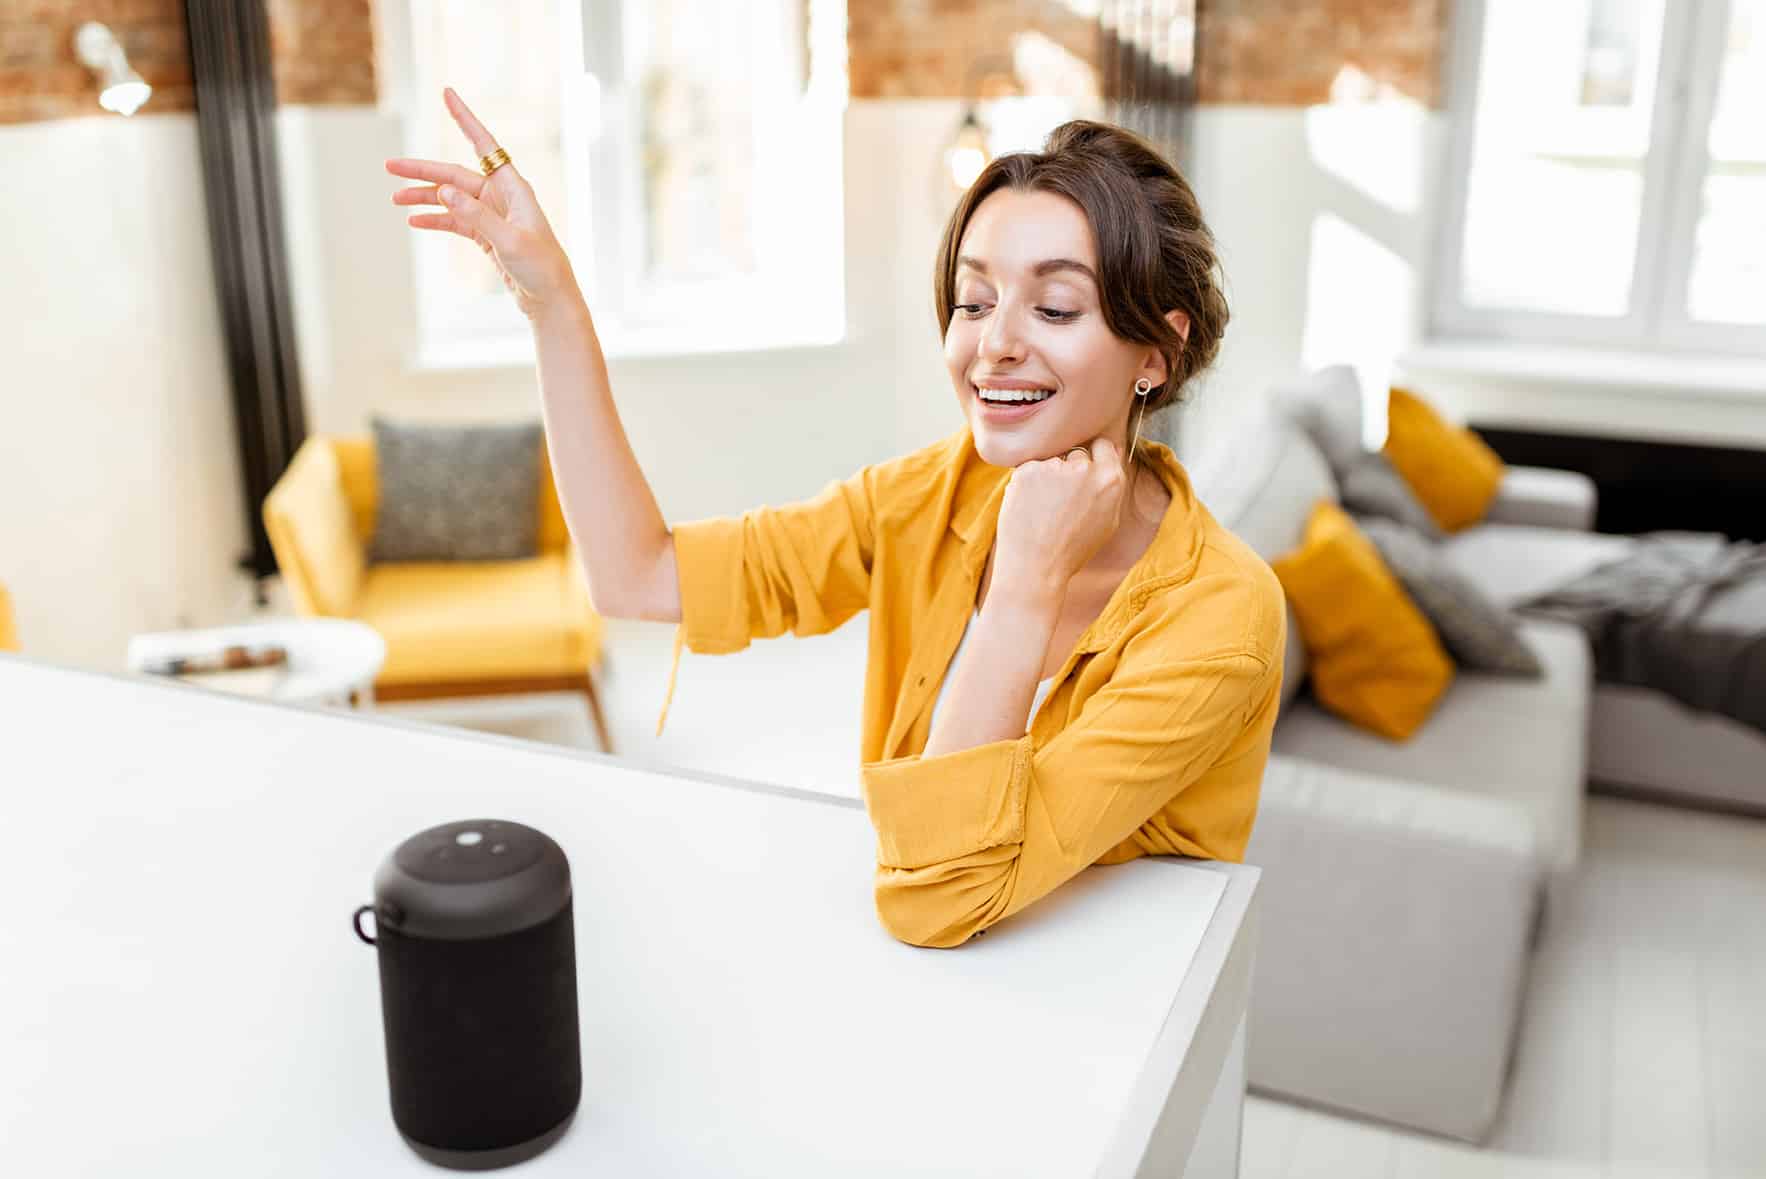 Voicebots: Enhancing customer experience with voice-based personal assistants